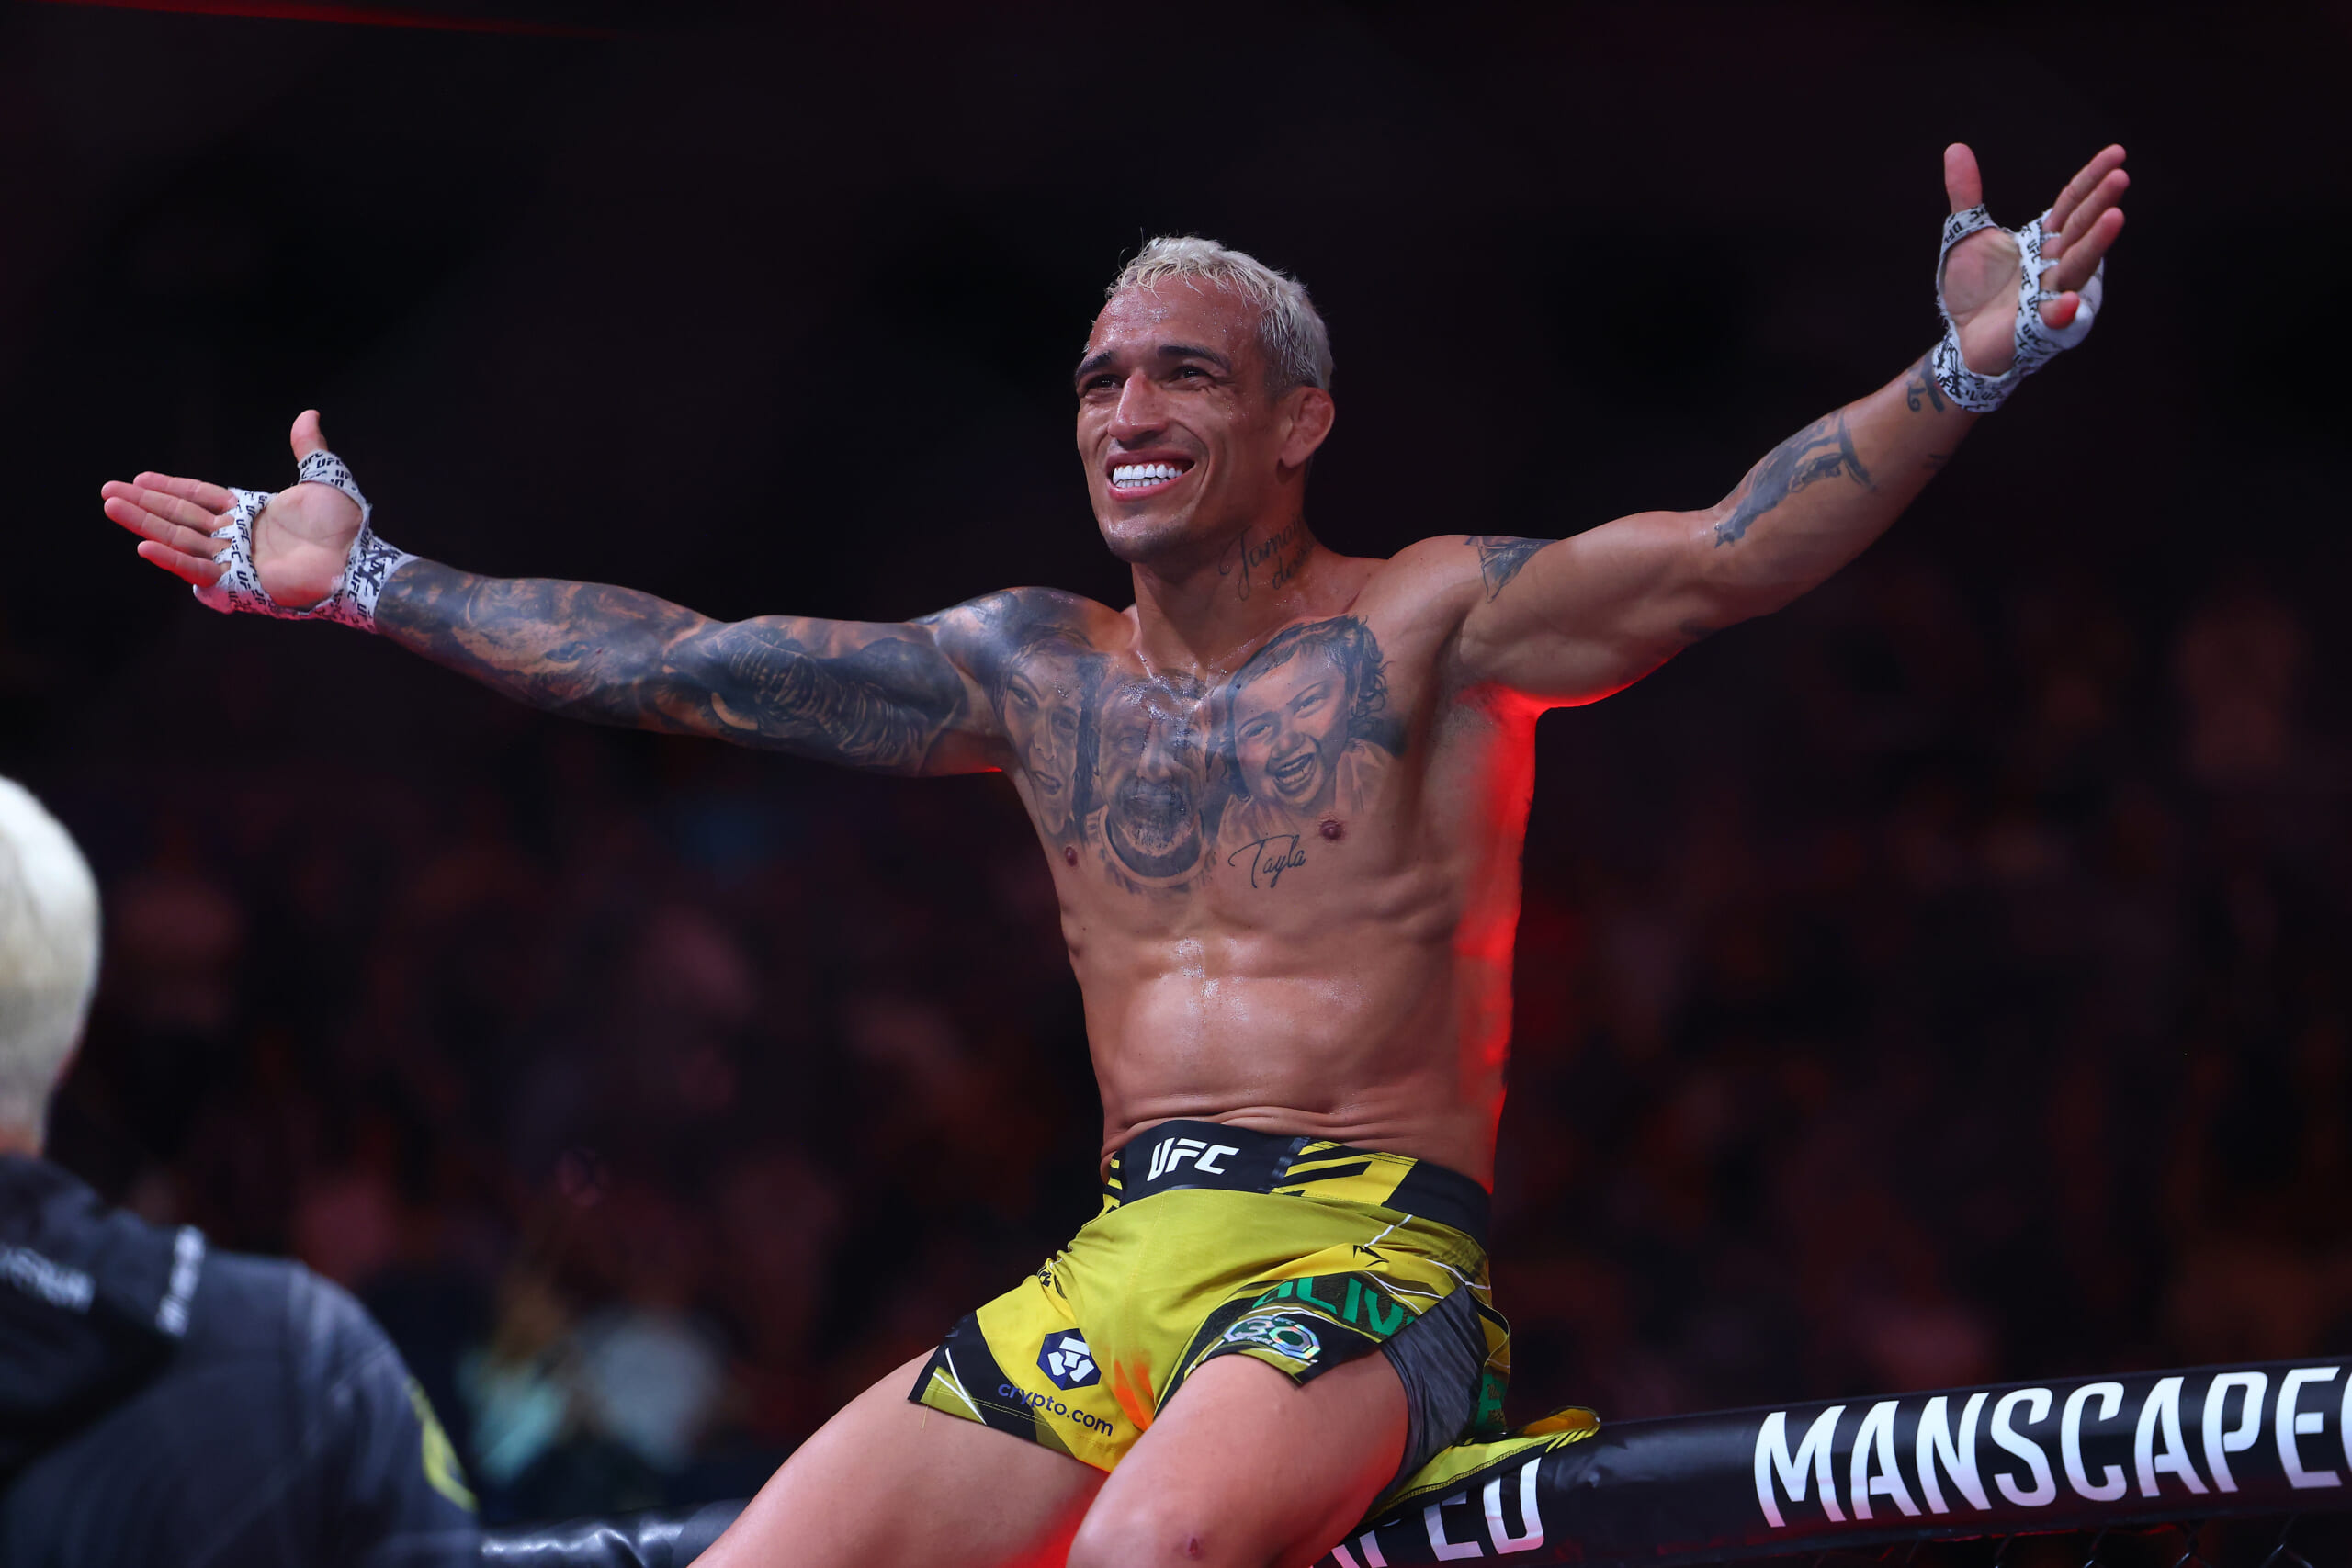 After UFC 289, Charles Oliveira must be next for the lightweight title